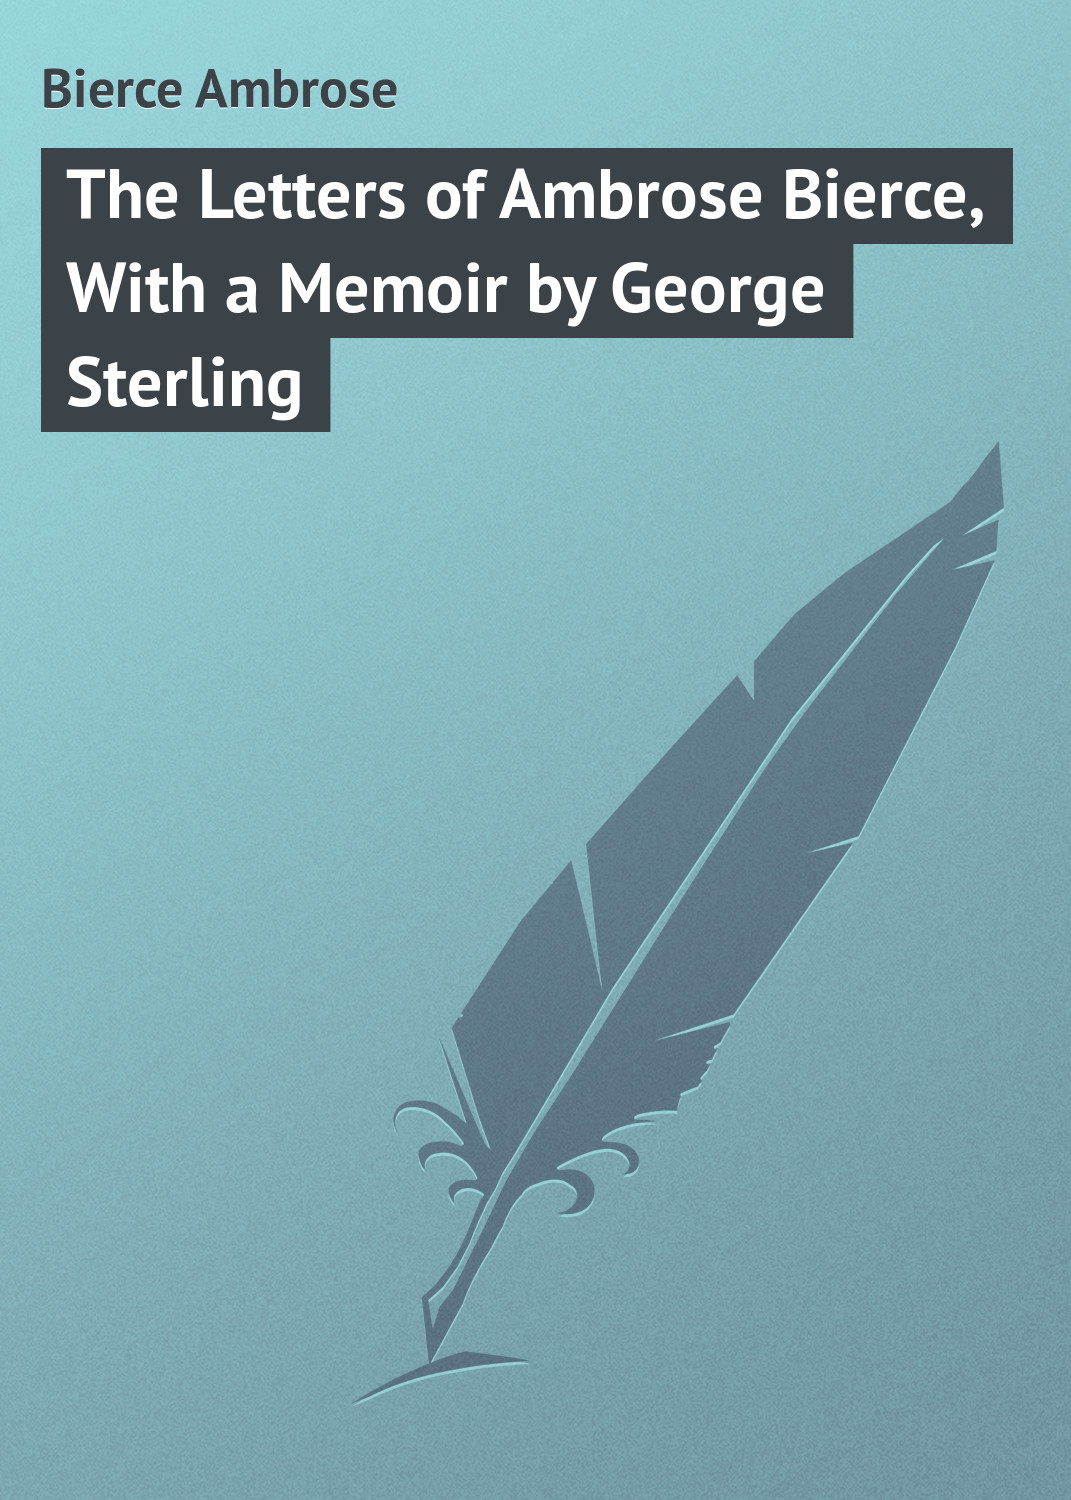 The Letters of Ambrose Bierce, With a Memoir by George Sterling